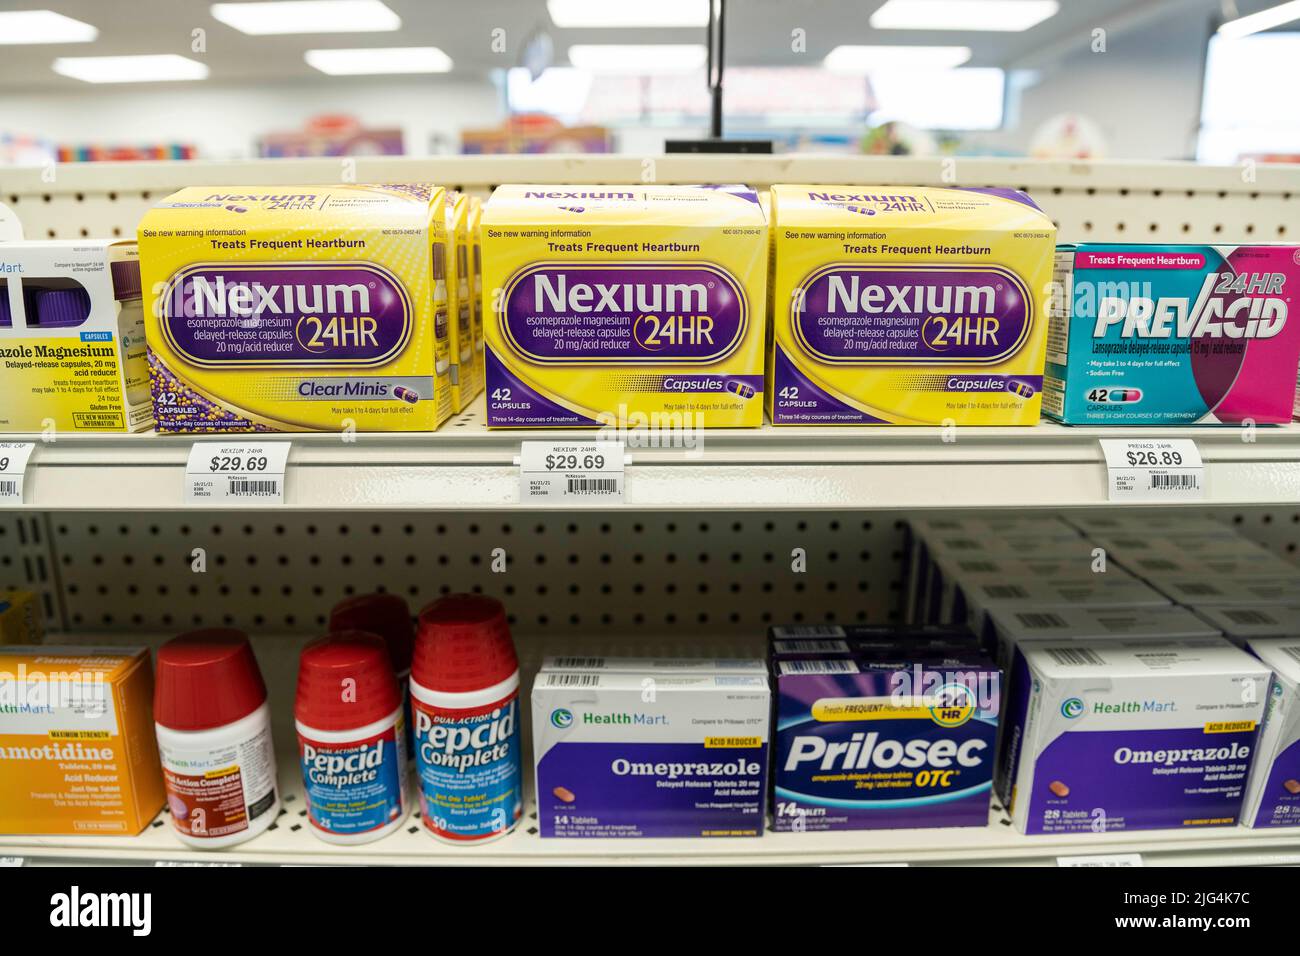 Boxes of Nexium, Prilosec, and Pepcid brand heartburn medication sit on the shelves of a drug store Stock Photo